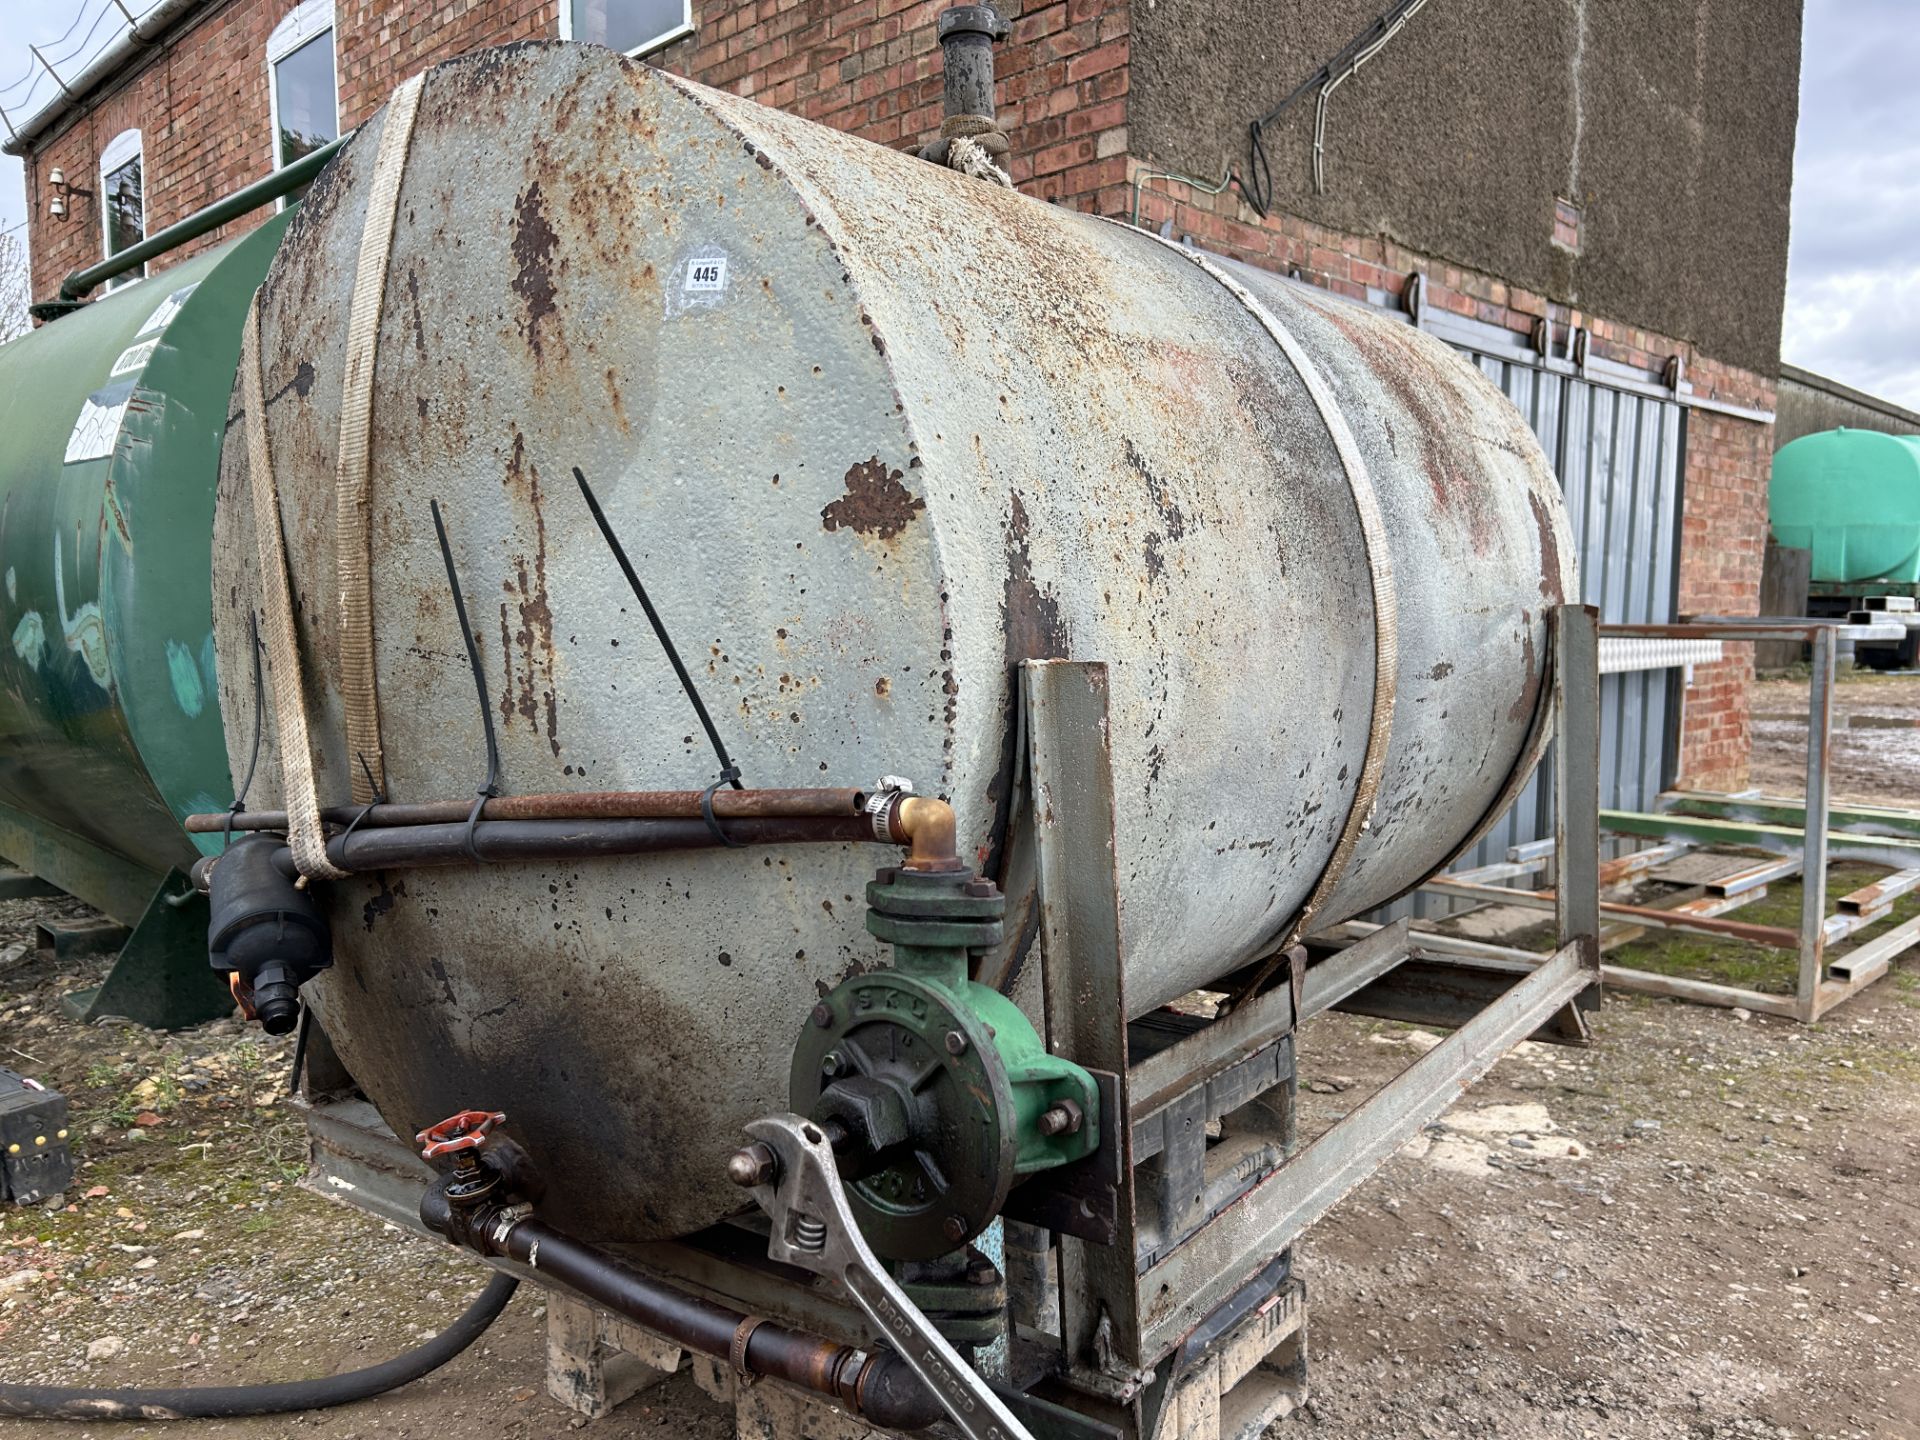 Metal fuel tank with stand and hand pump